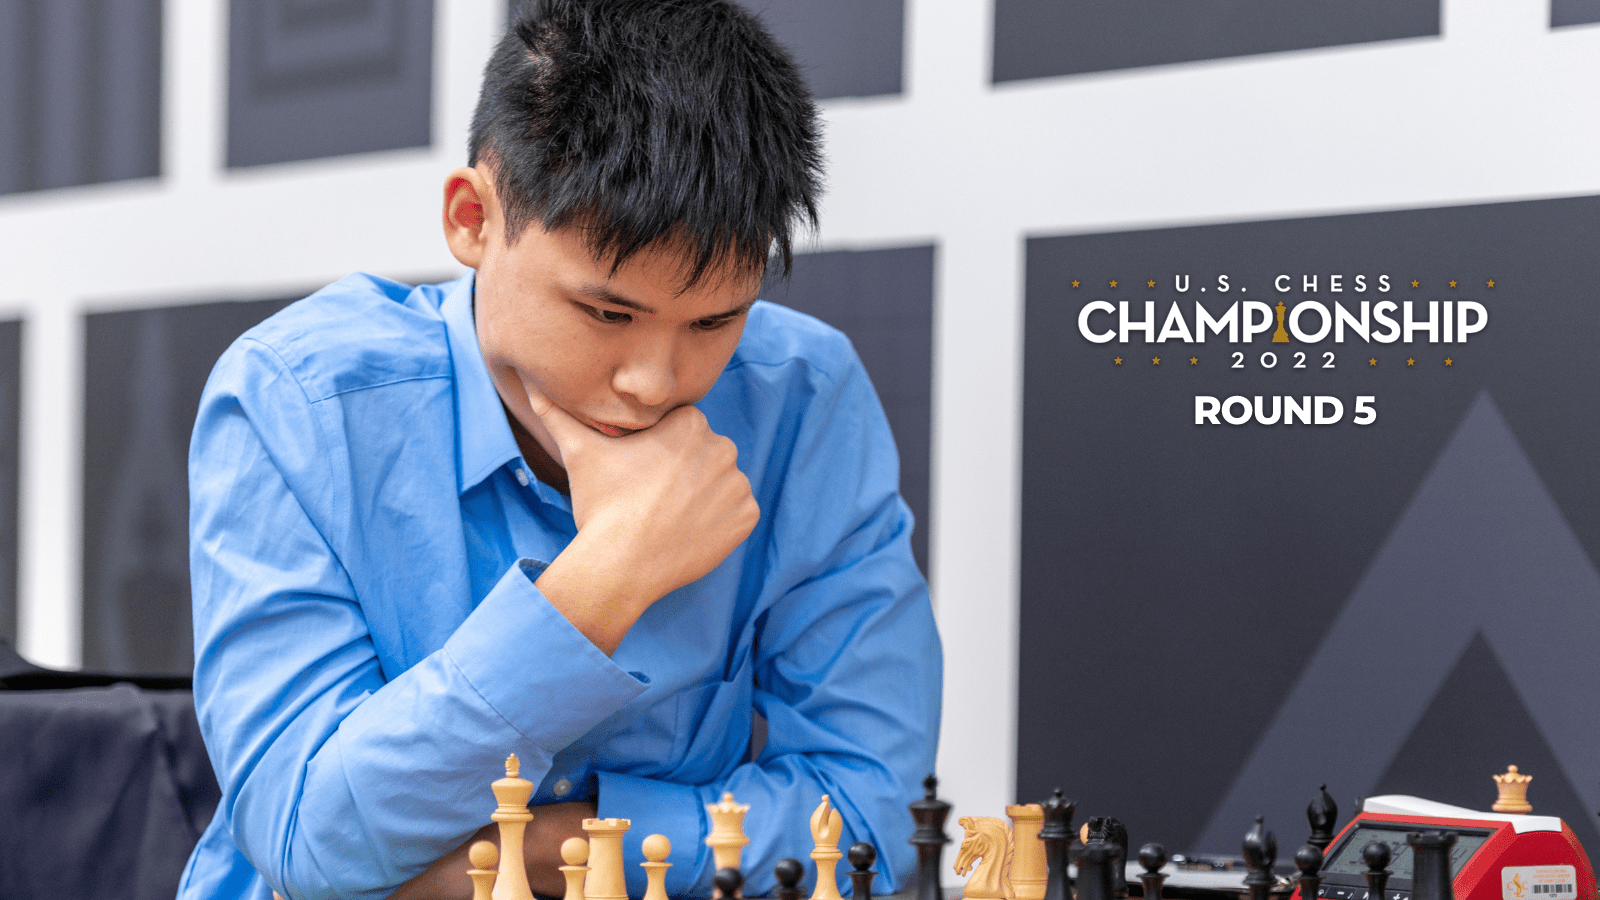 Liang “Ecstatic” After Defeating Aronian